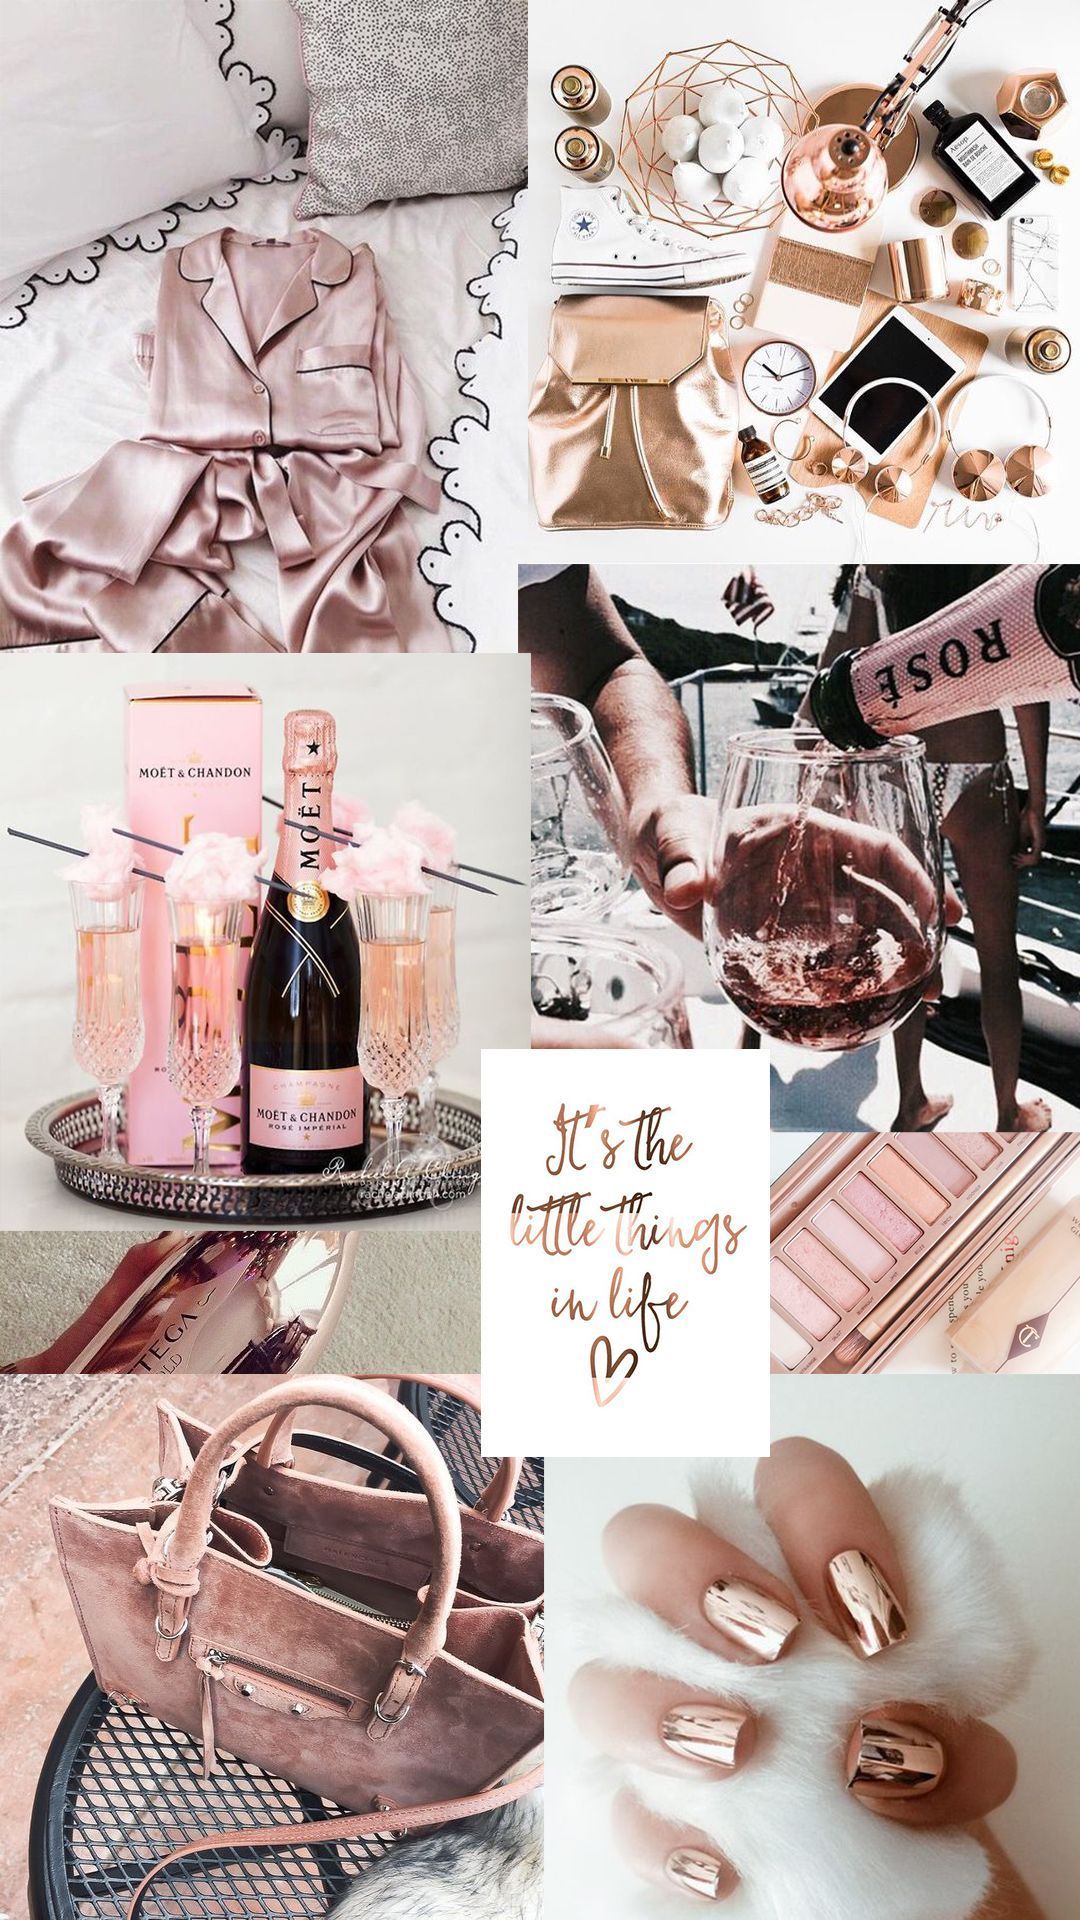 A collage of rose gold and pink items including a handbag, a bottle of moet, and a pink book. - Champagne